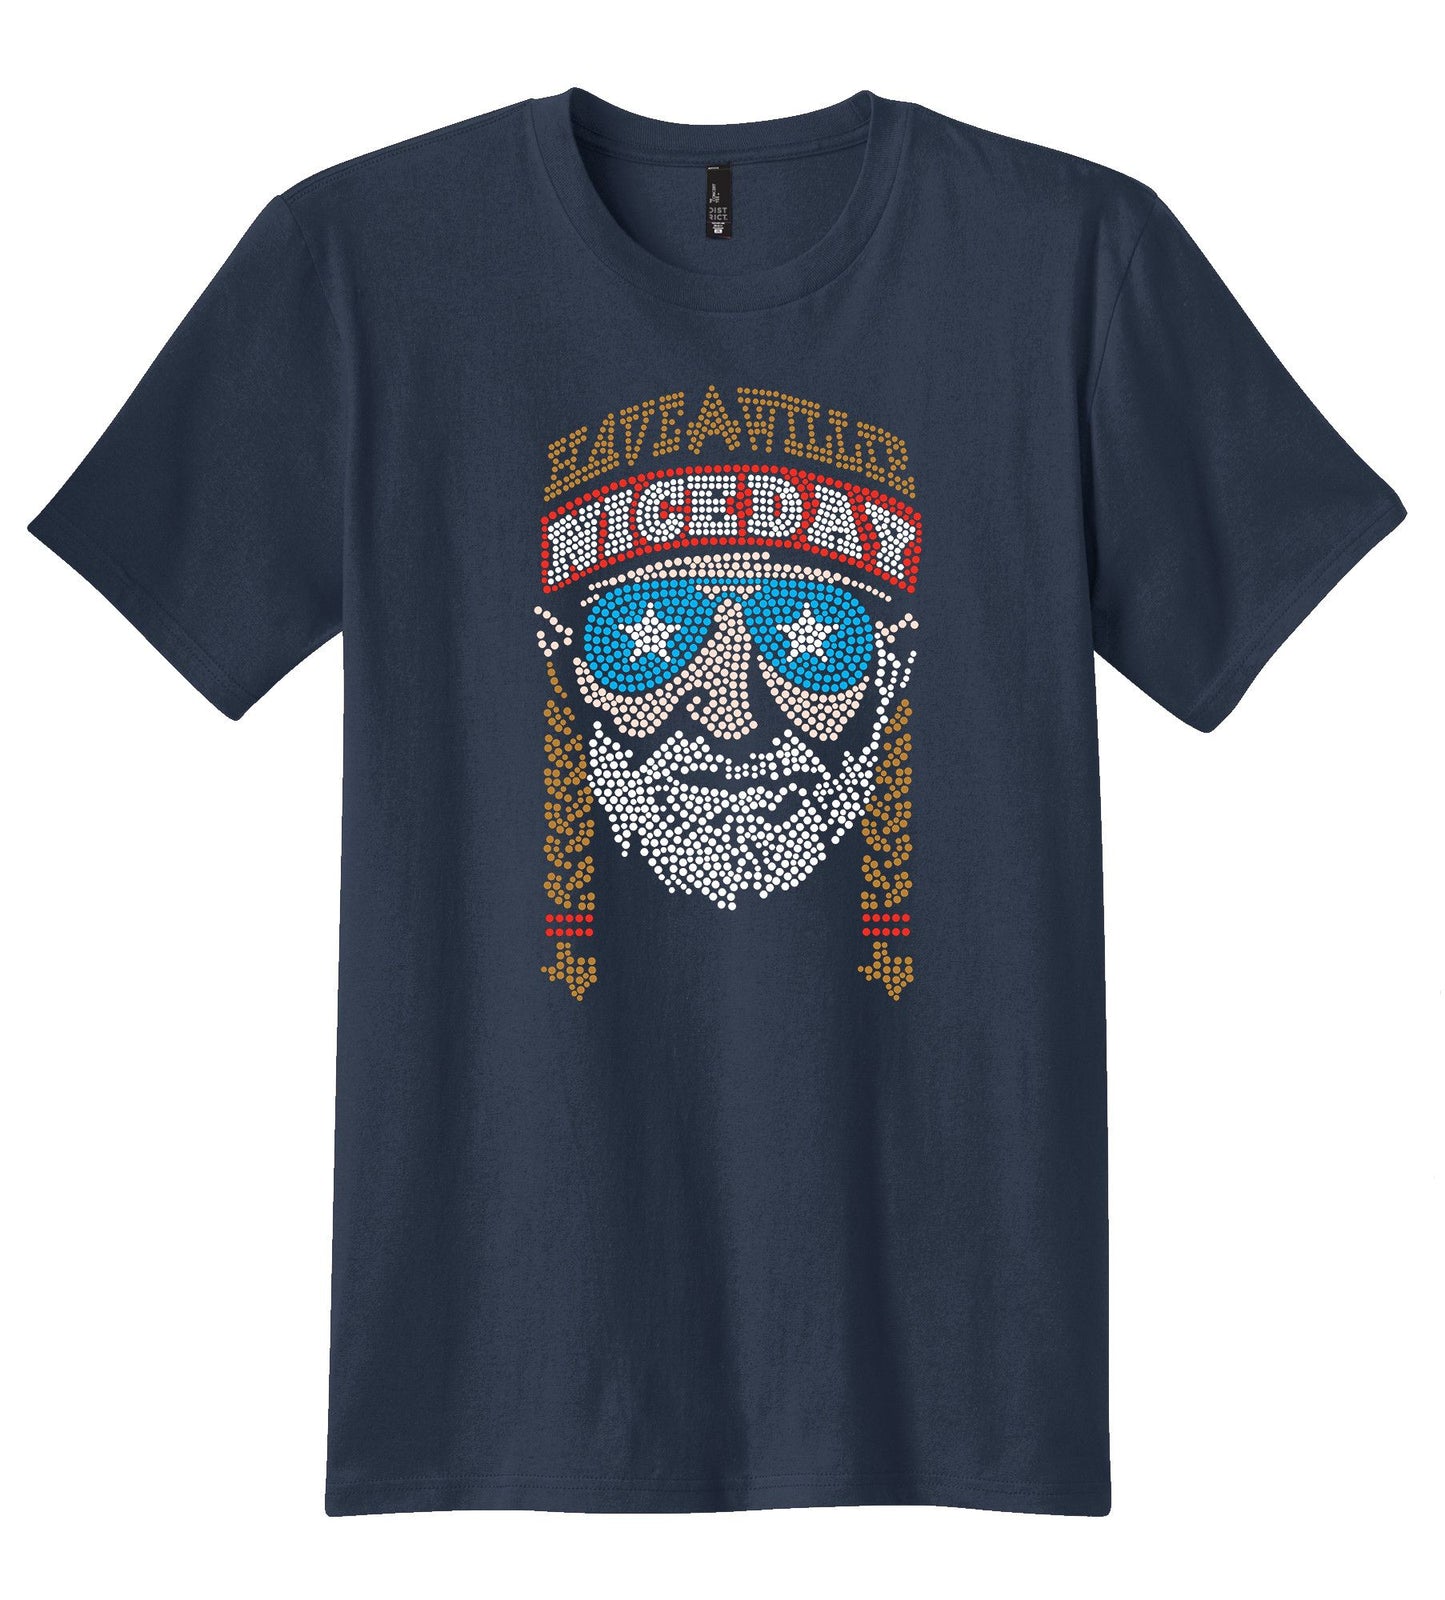 HAVE A WILLIE NICE DAY - OFFICIAL WILLIE NELSON STAR GLASSES UNISEX TEE